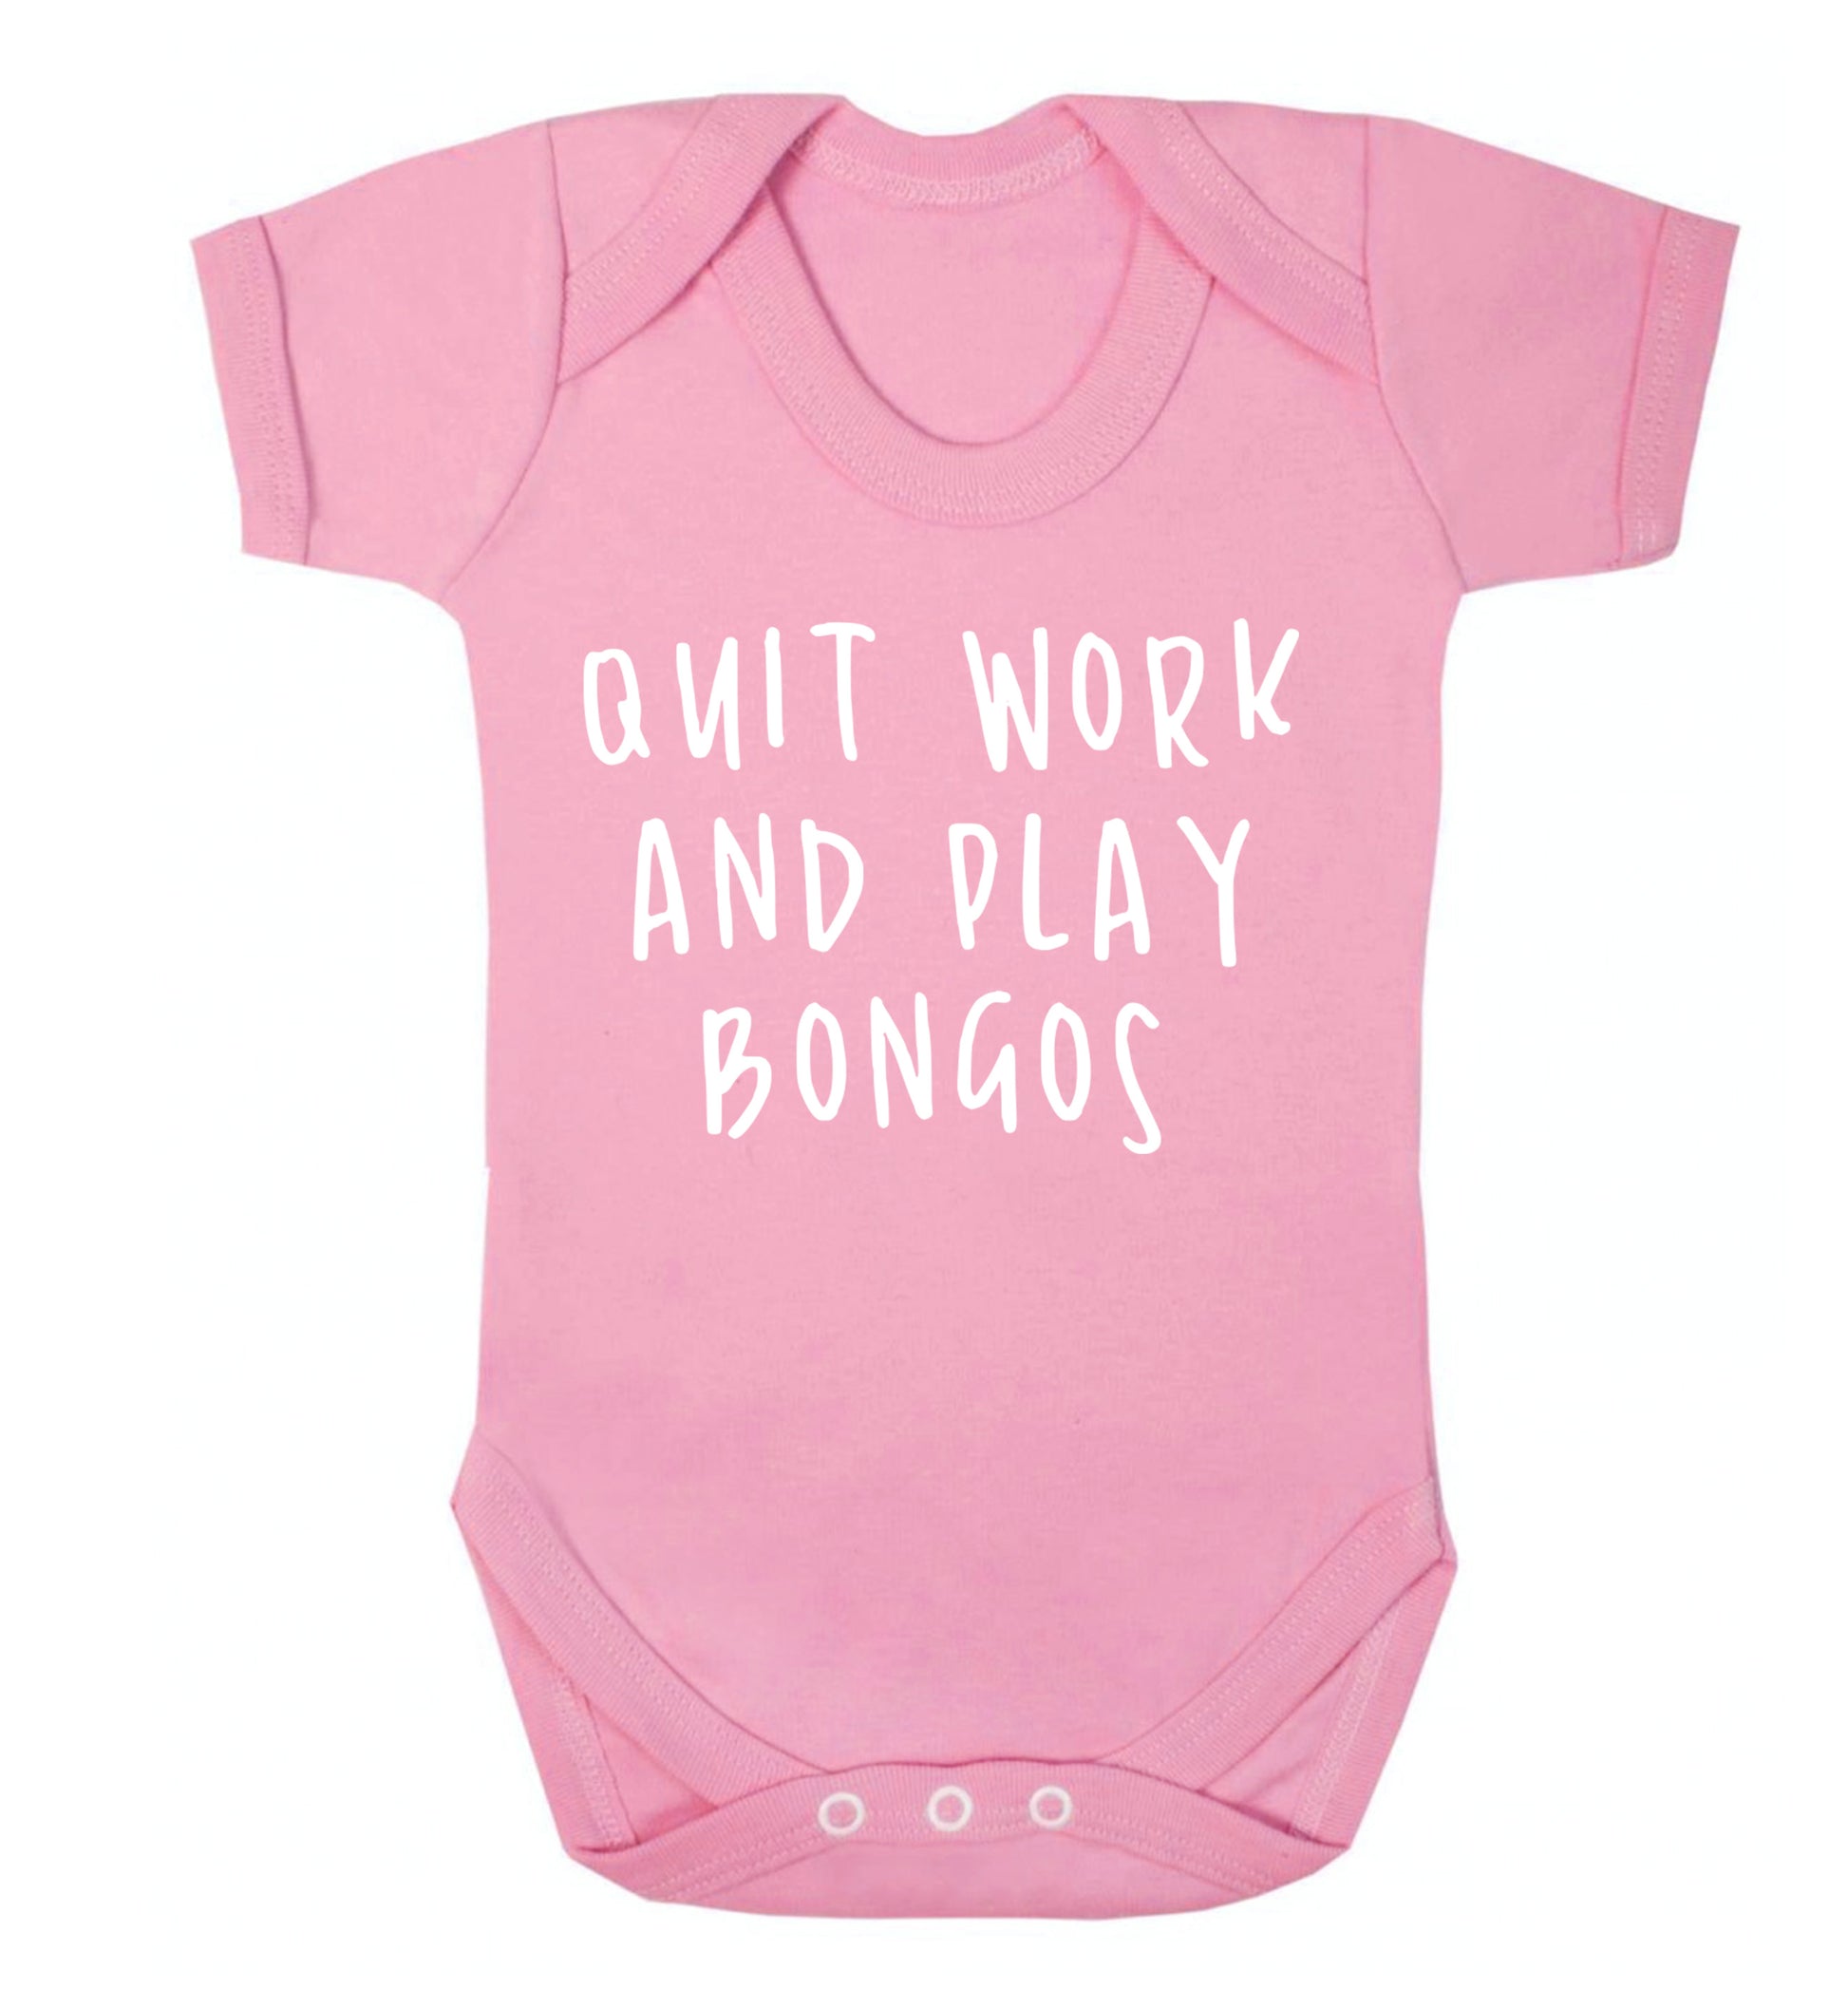 Quit work and play bongos Baby Vest pale pink 18-24 months